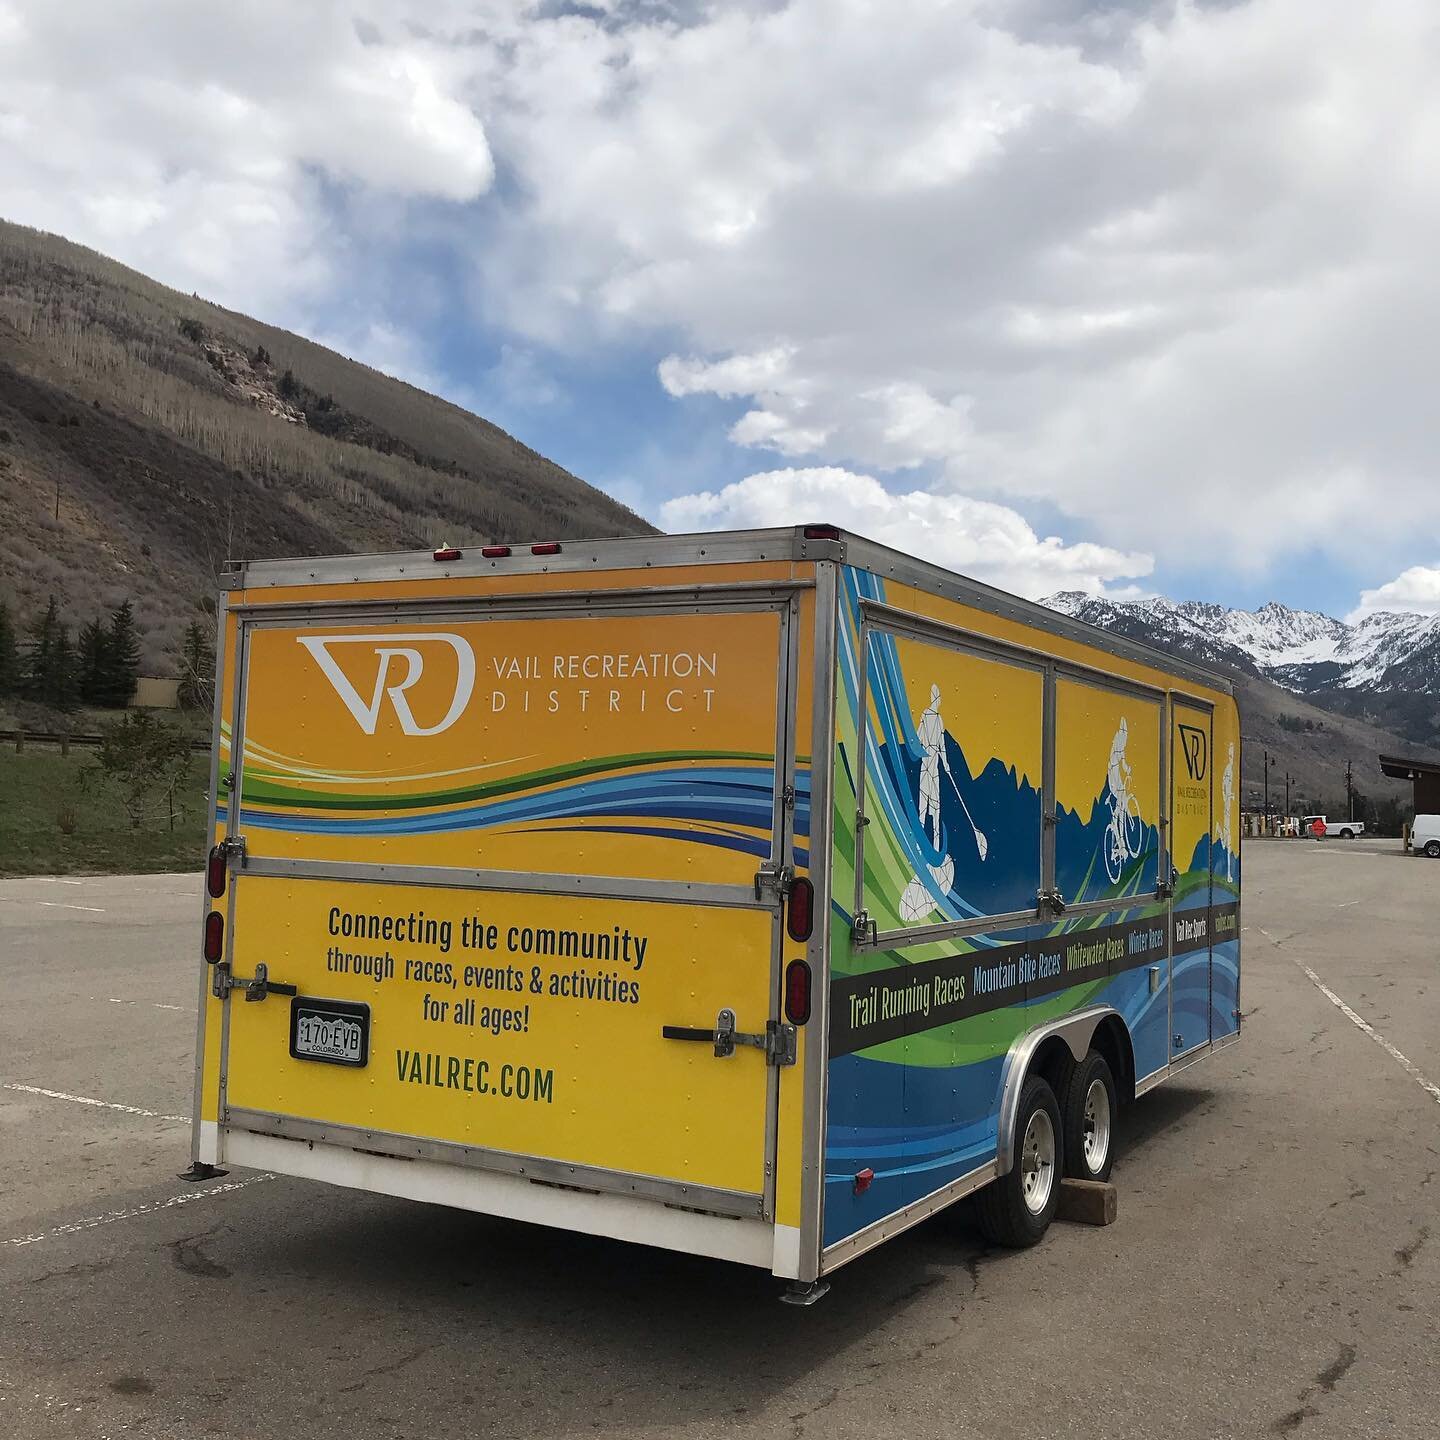 We recently completed a beautiful full wrap on the VRD race trailer. Thanks to Nell Davis at VRD for the fantastic design work! Look for it this summer around The Valley.